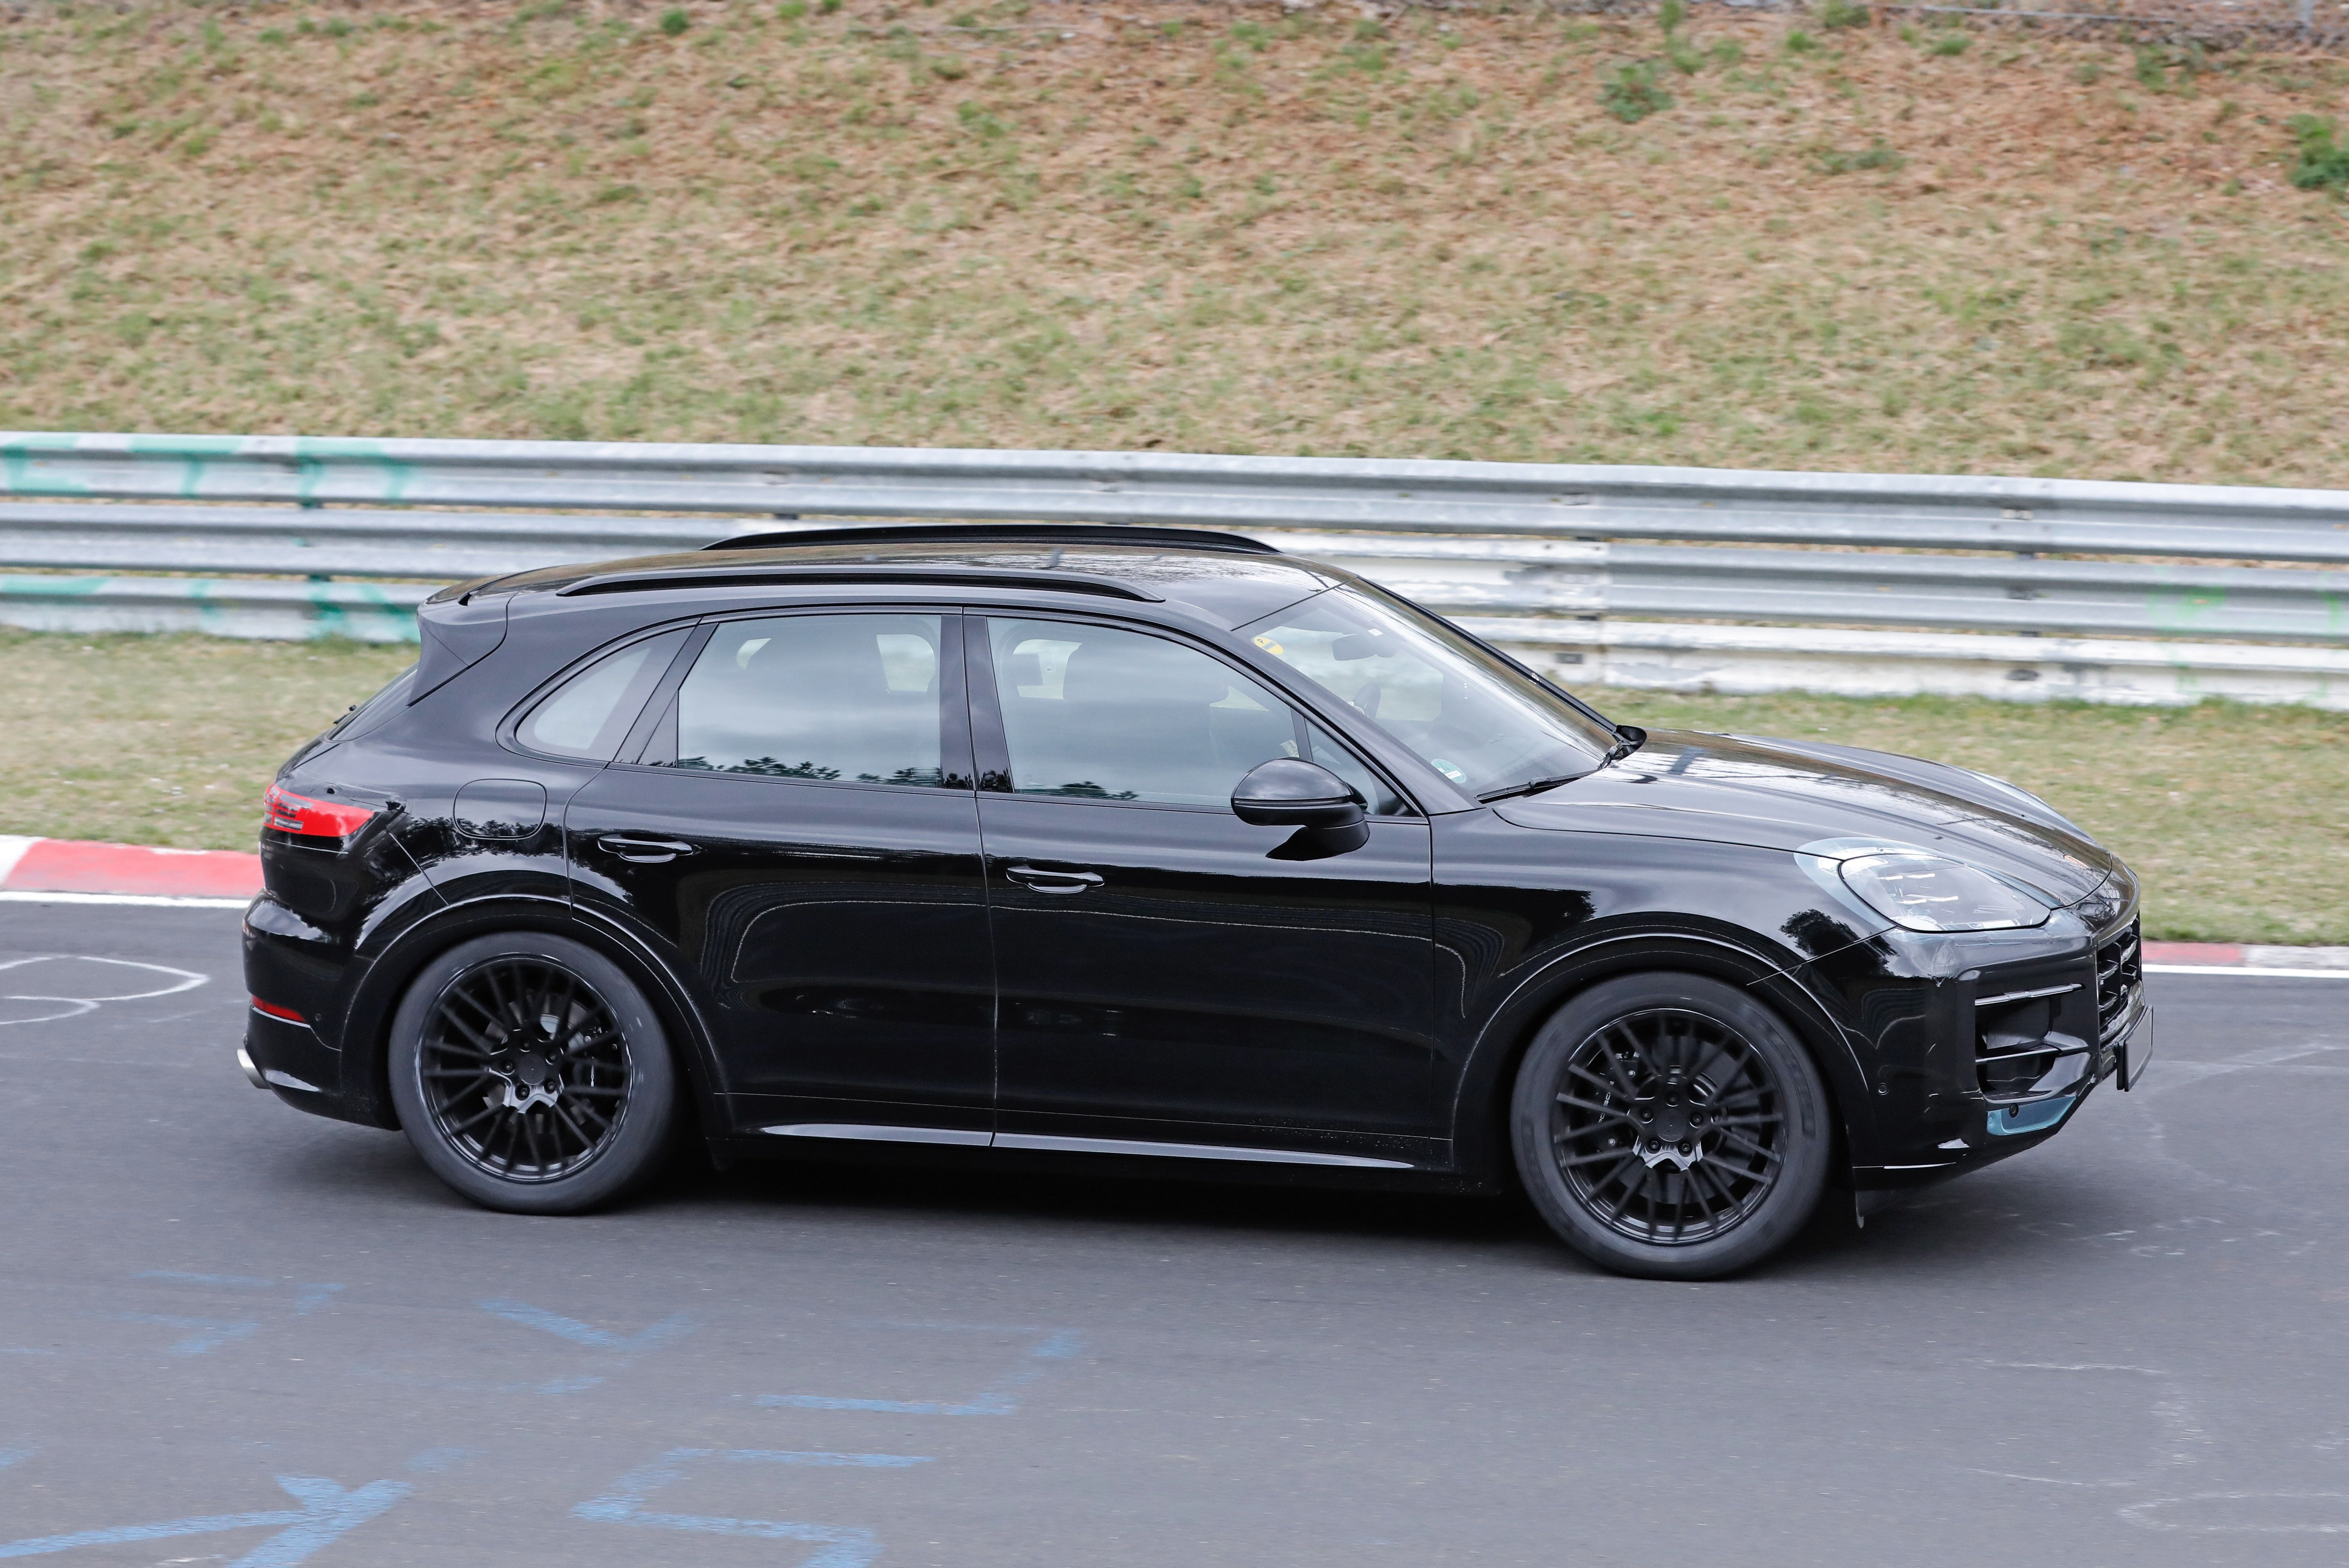 The 2023 Porsche Cayenne Turbo Facelift Caught Lapping The Nürburgring